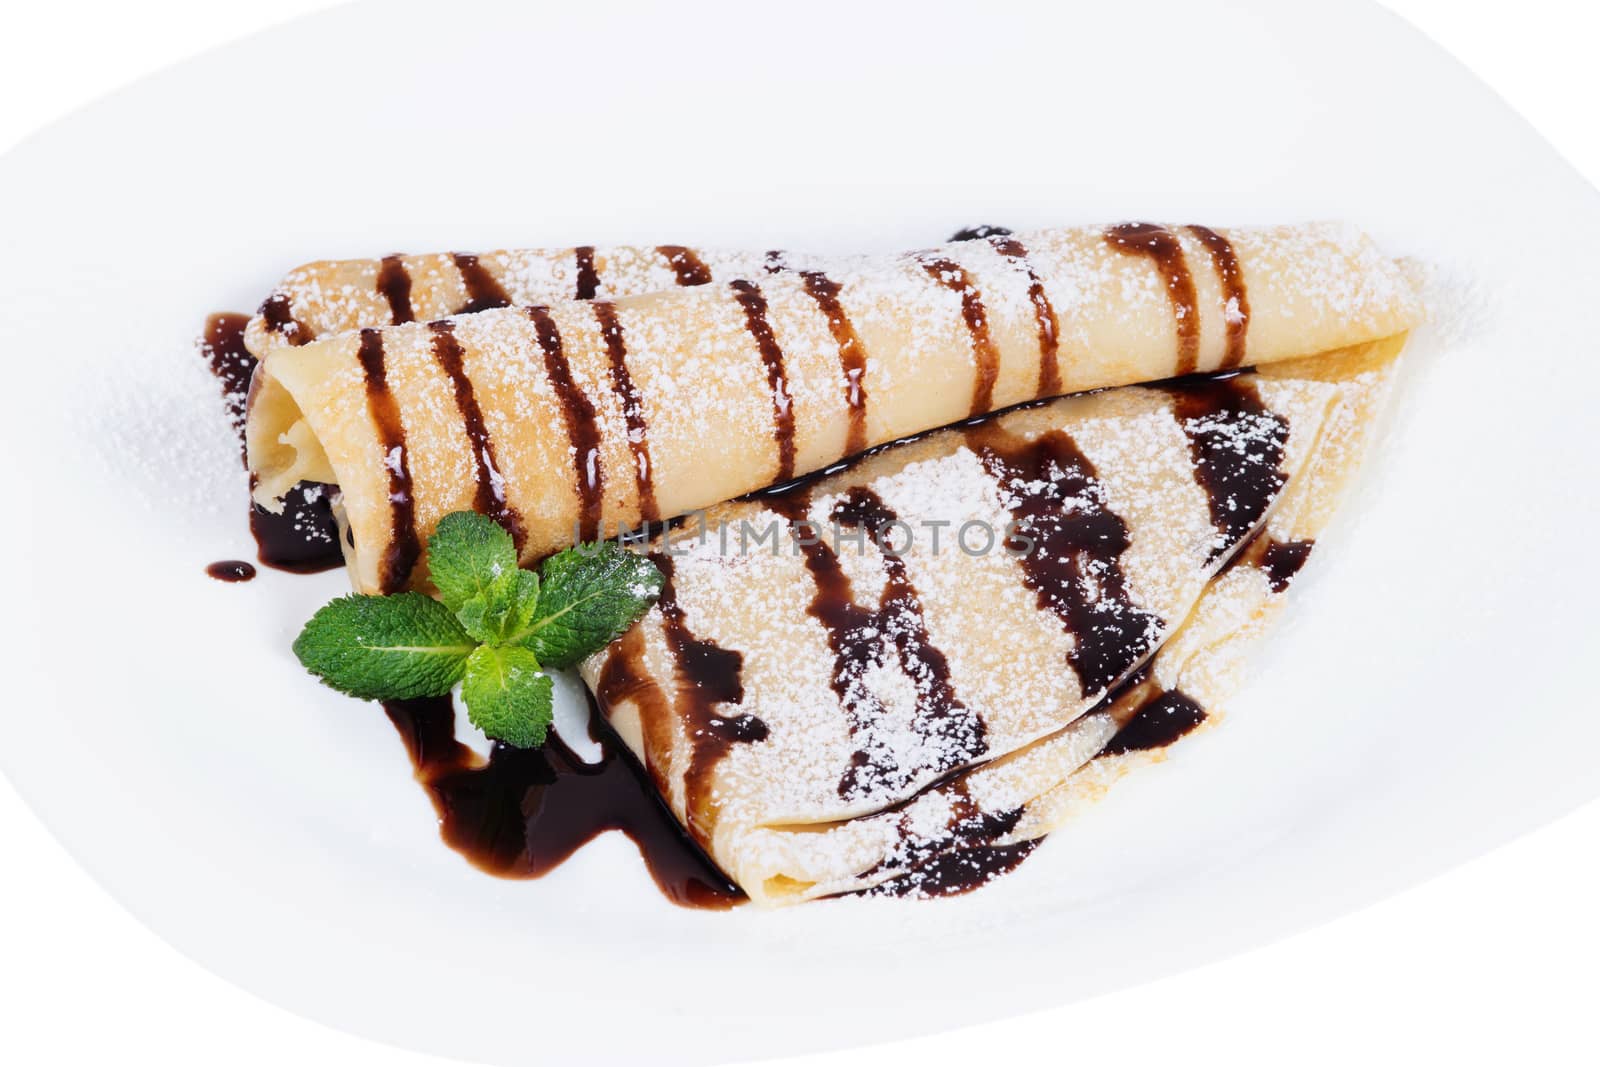 Pancakes with chocolate sauce and mint on a plate by kzen